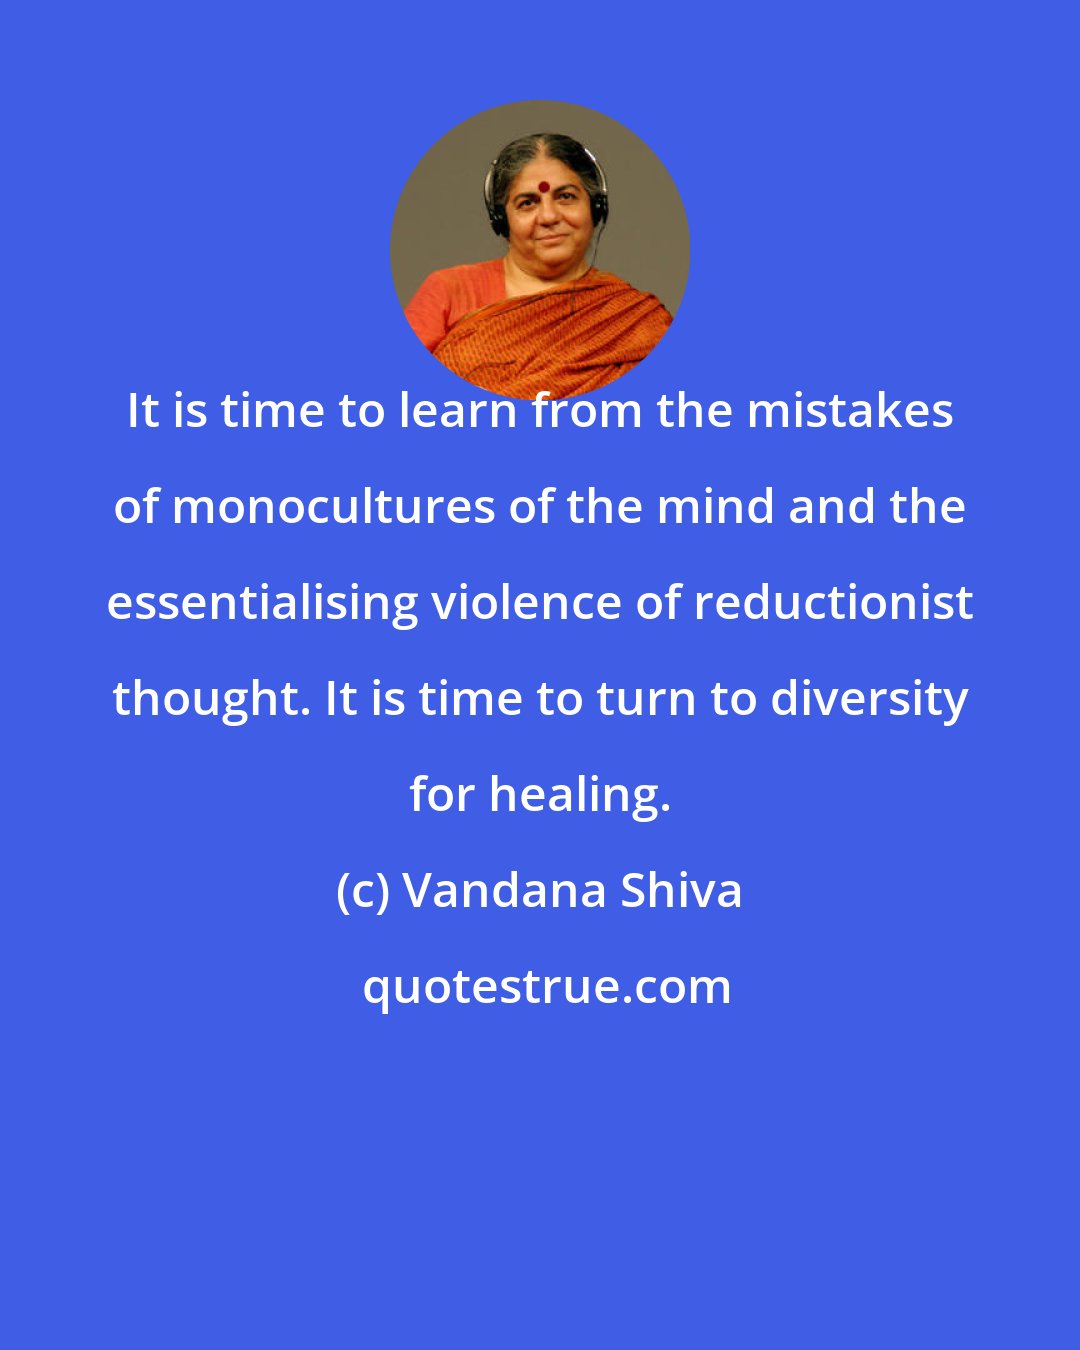 Vandana Shiva: It is time to learn from the mistakes of monocultures of the mind and the essentialising violence of reductionist thought. It is time to turn to diversity for healing.